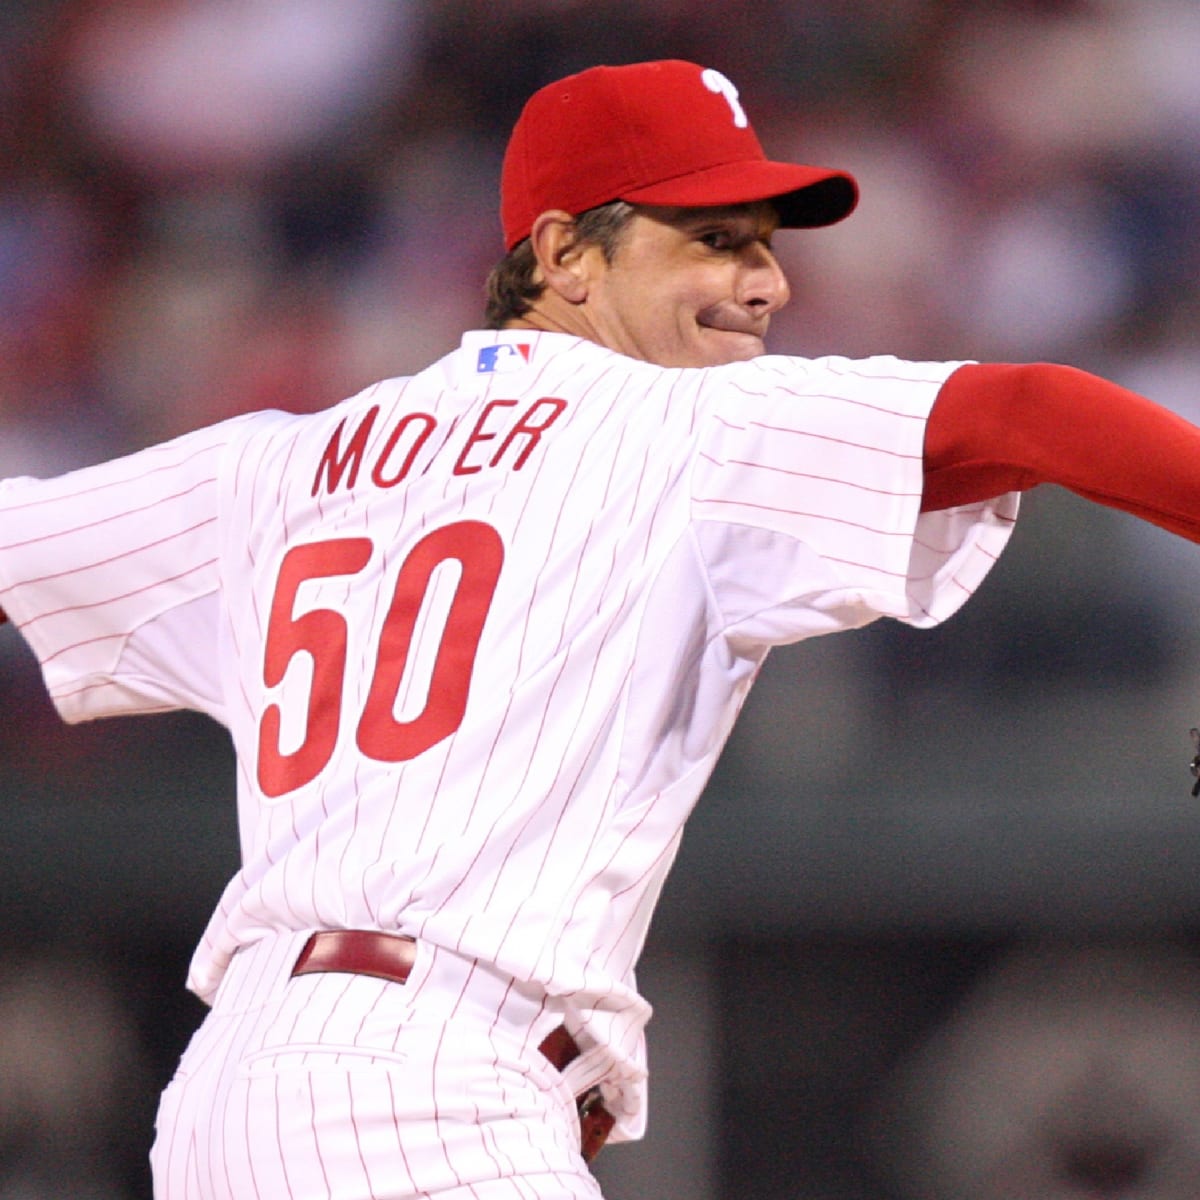 Phillies: Does Jamie Moyer have a chance at Hall of Fame?